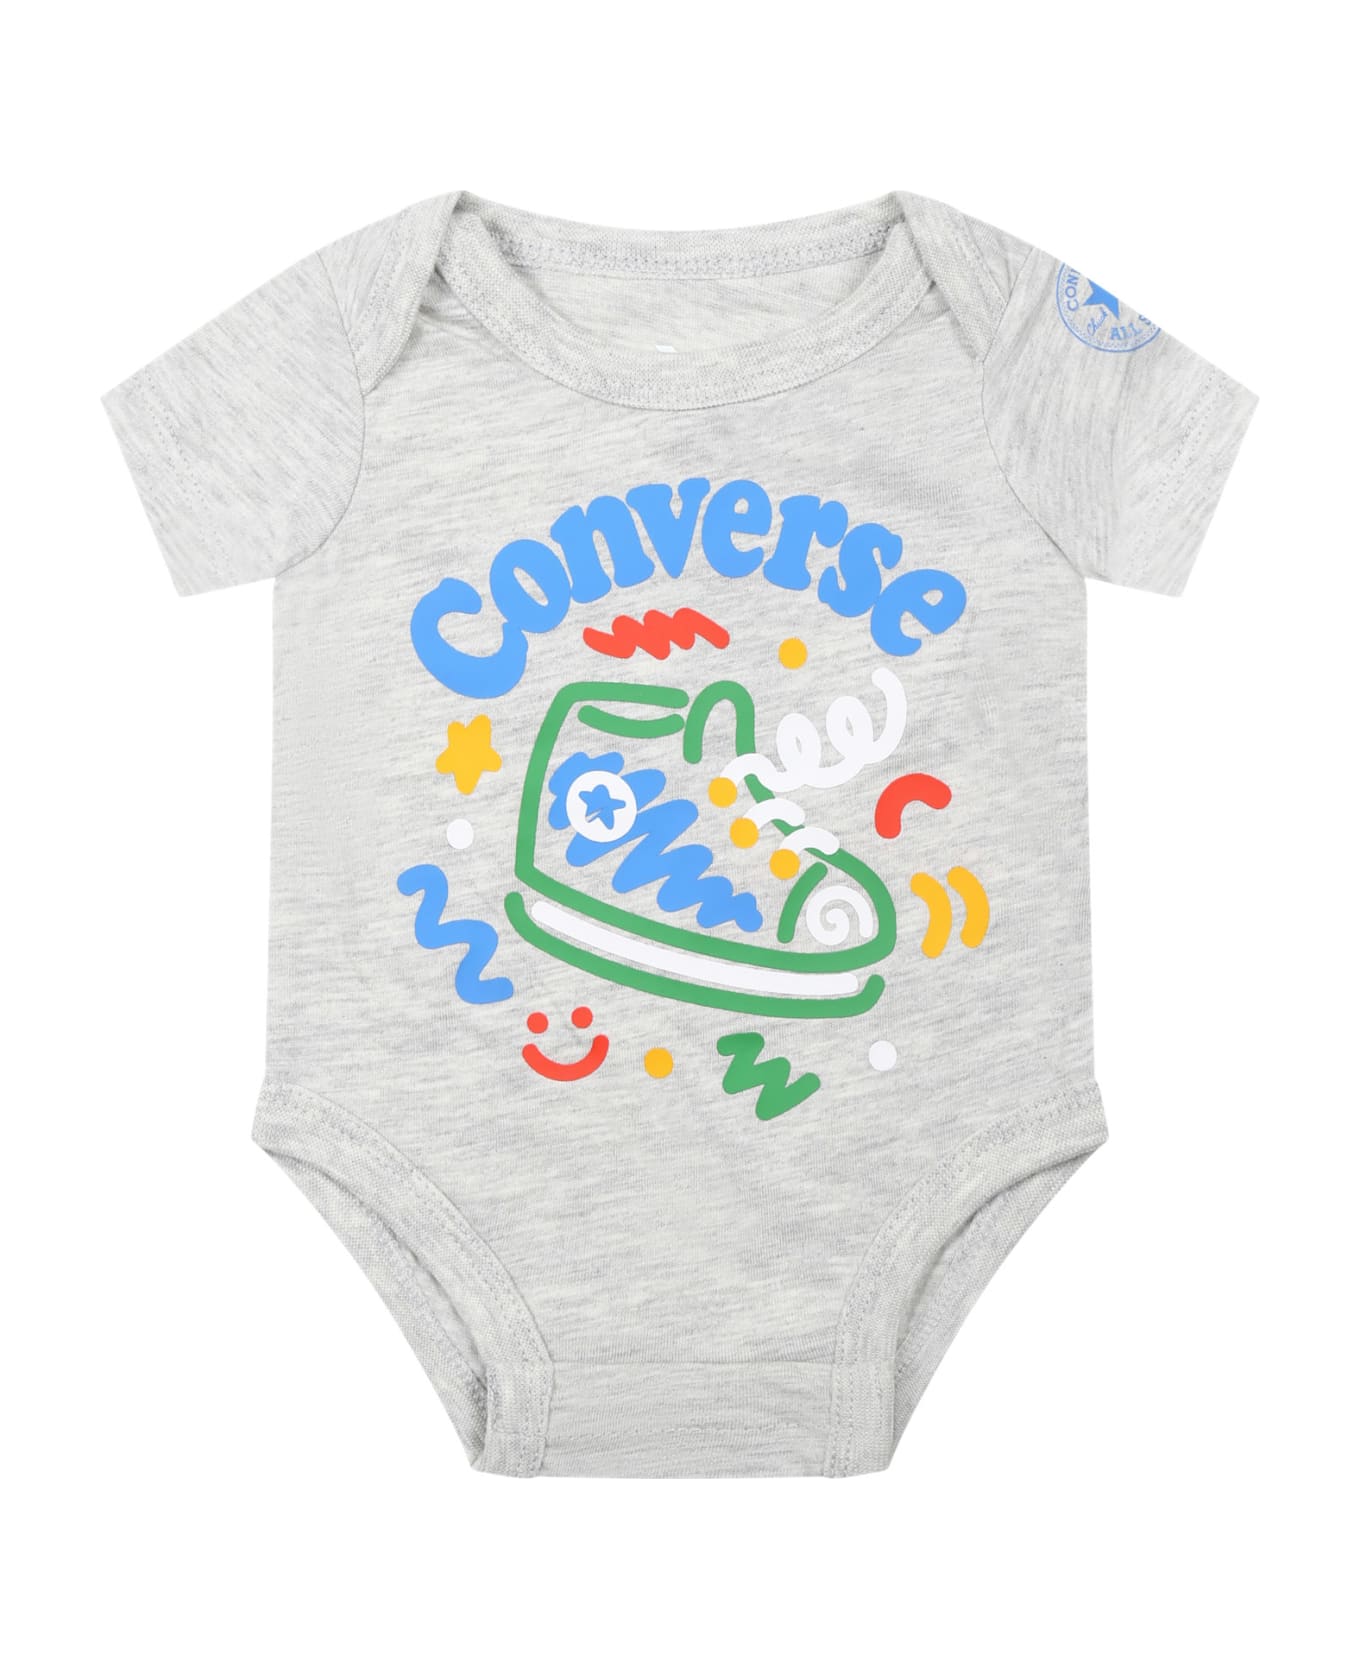 Converse Multicolor Set For Baby Boy With Logo And Print - Multicolor